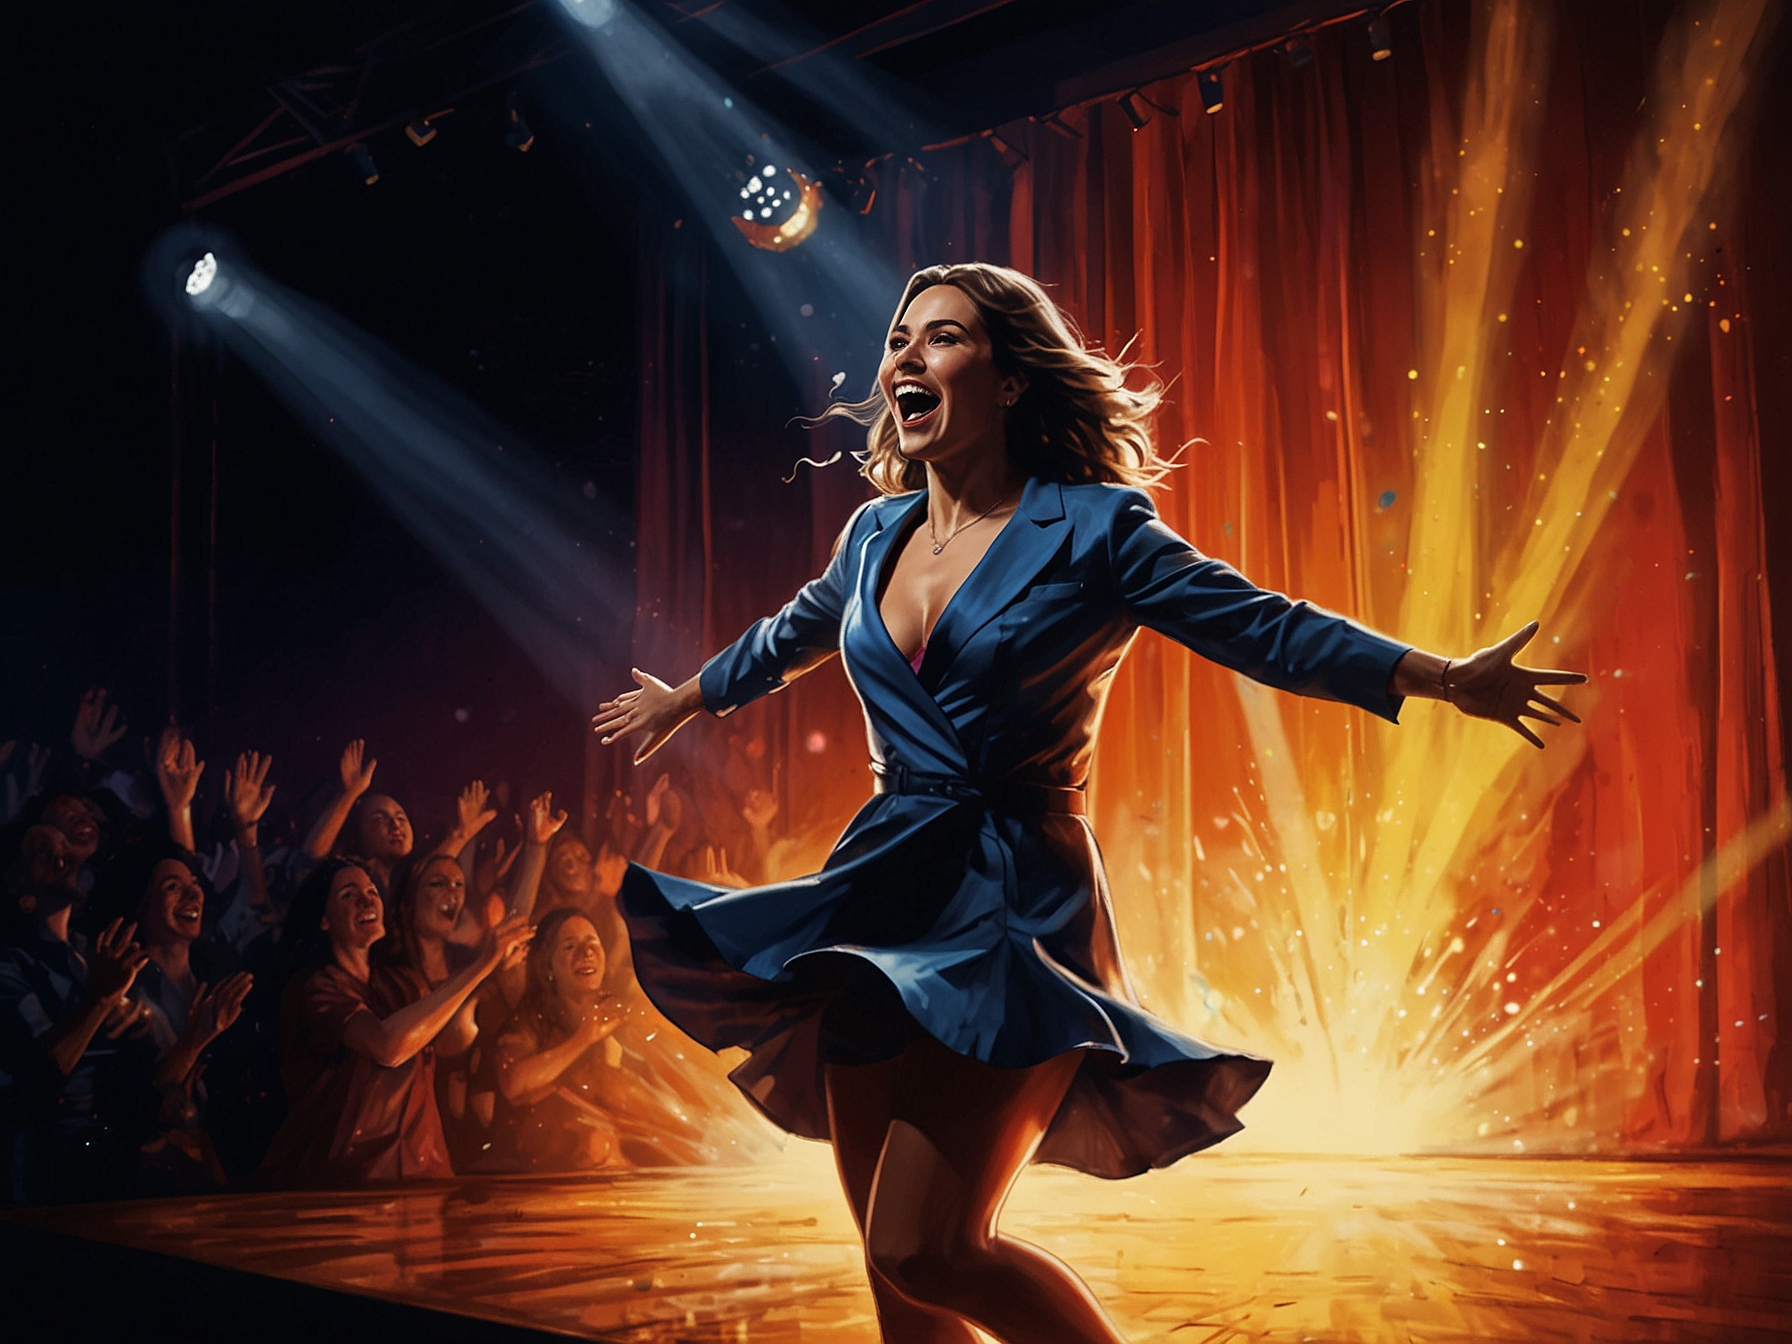 Nathy Peluso performing energetically on stage with vibrant lighting and a dynamic backdrop, capturing the high energy and theatrical flair of her live shows.